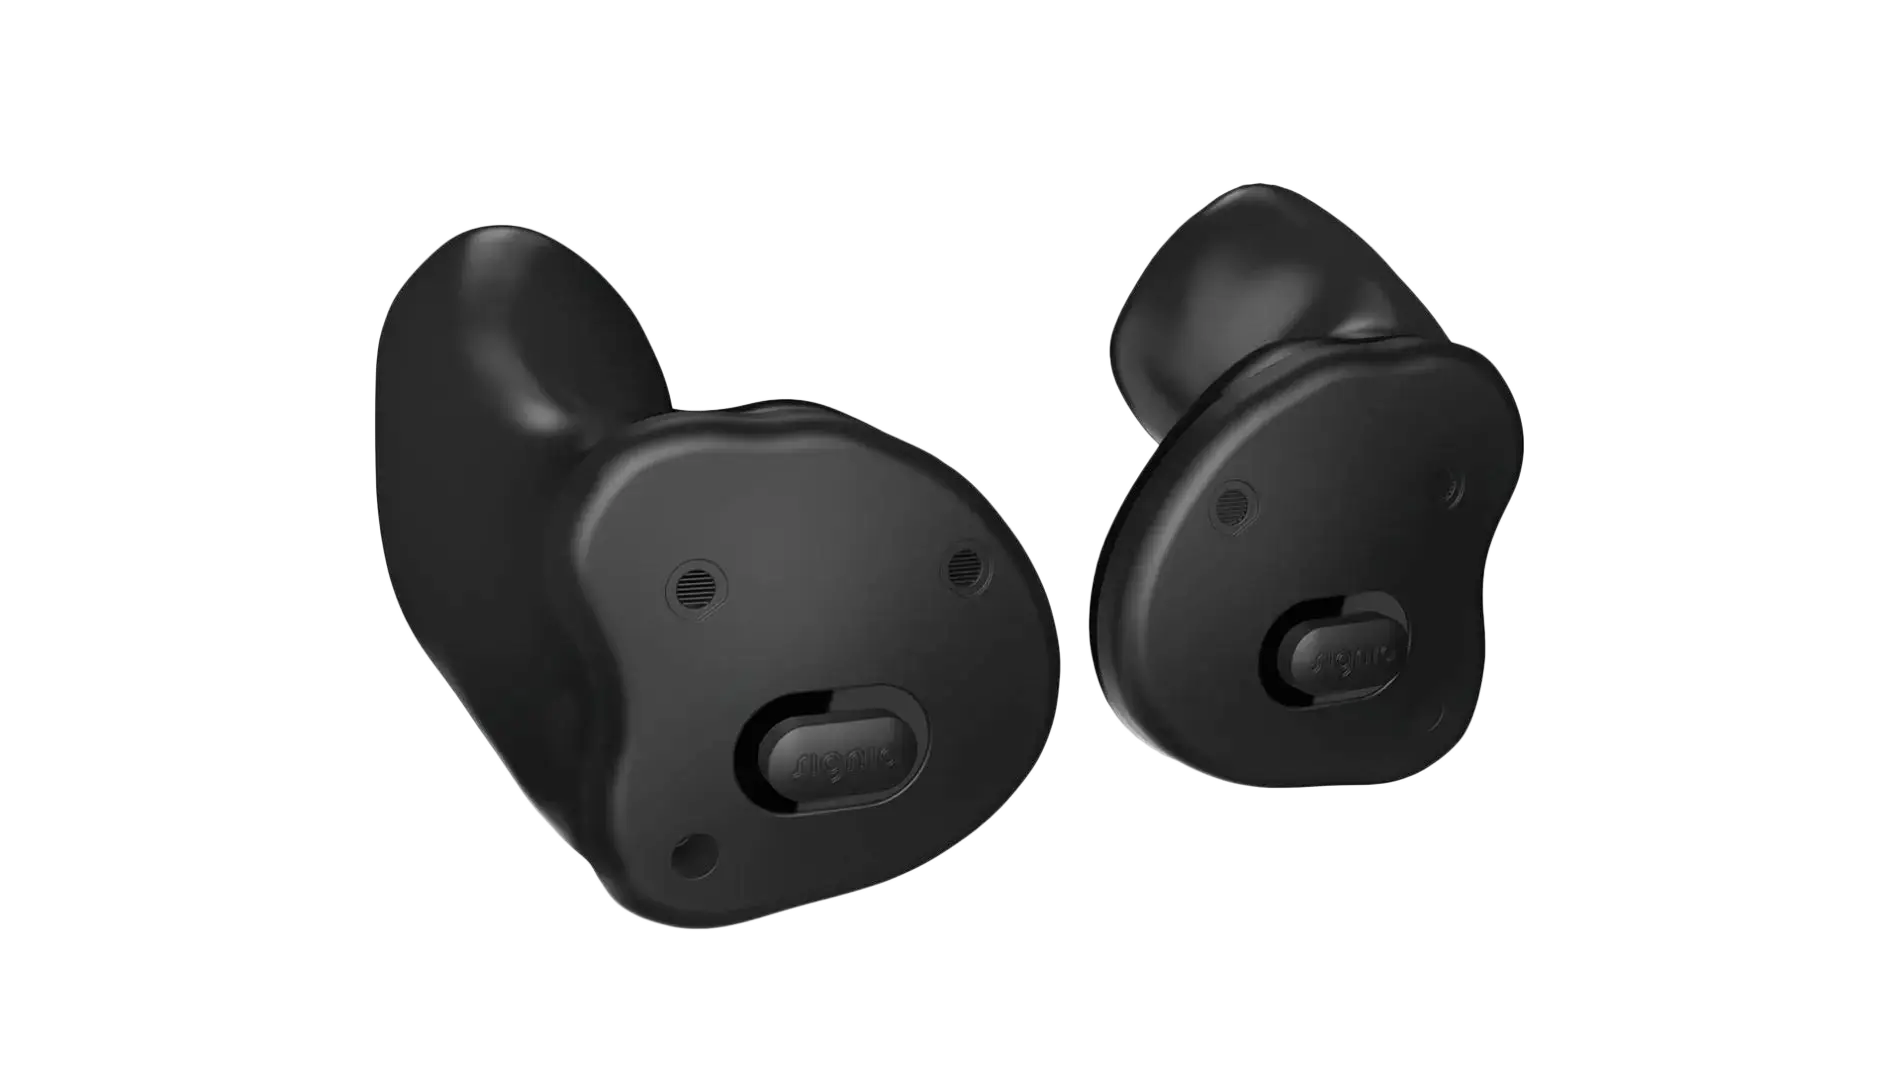 Hearing aids in black.